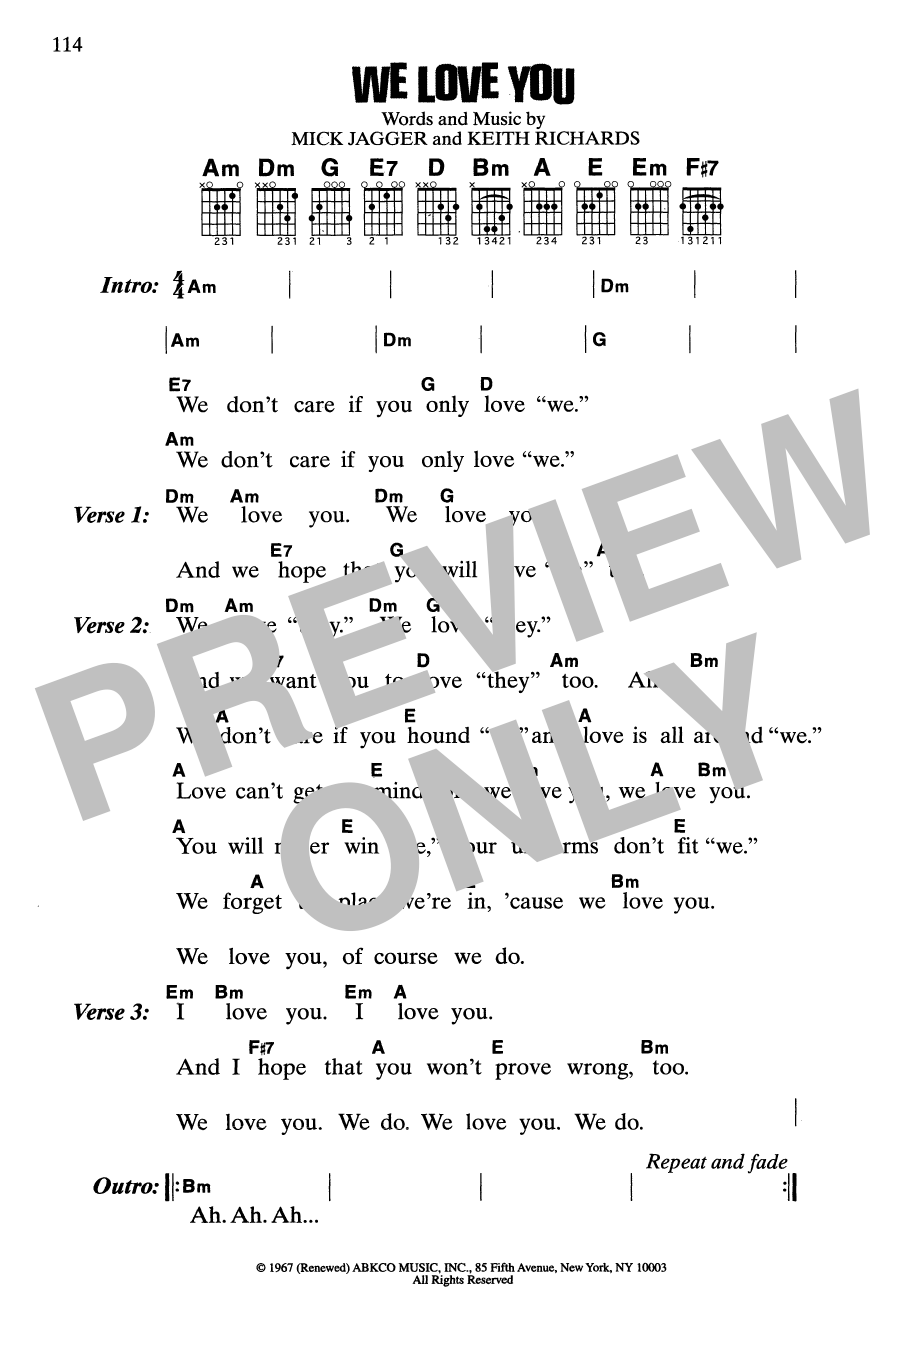 Download The Rolling Stones We Love You Sheet Music